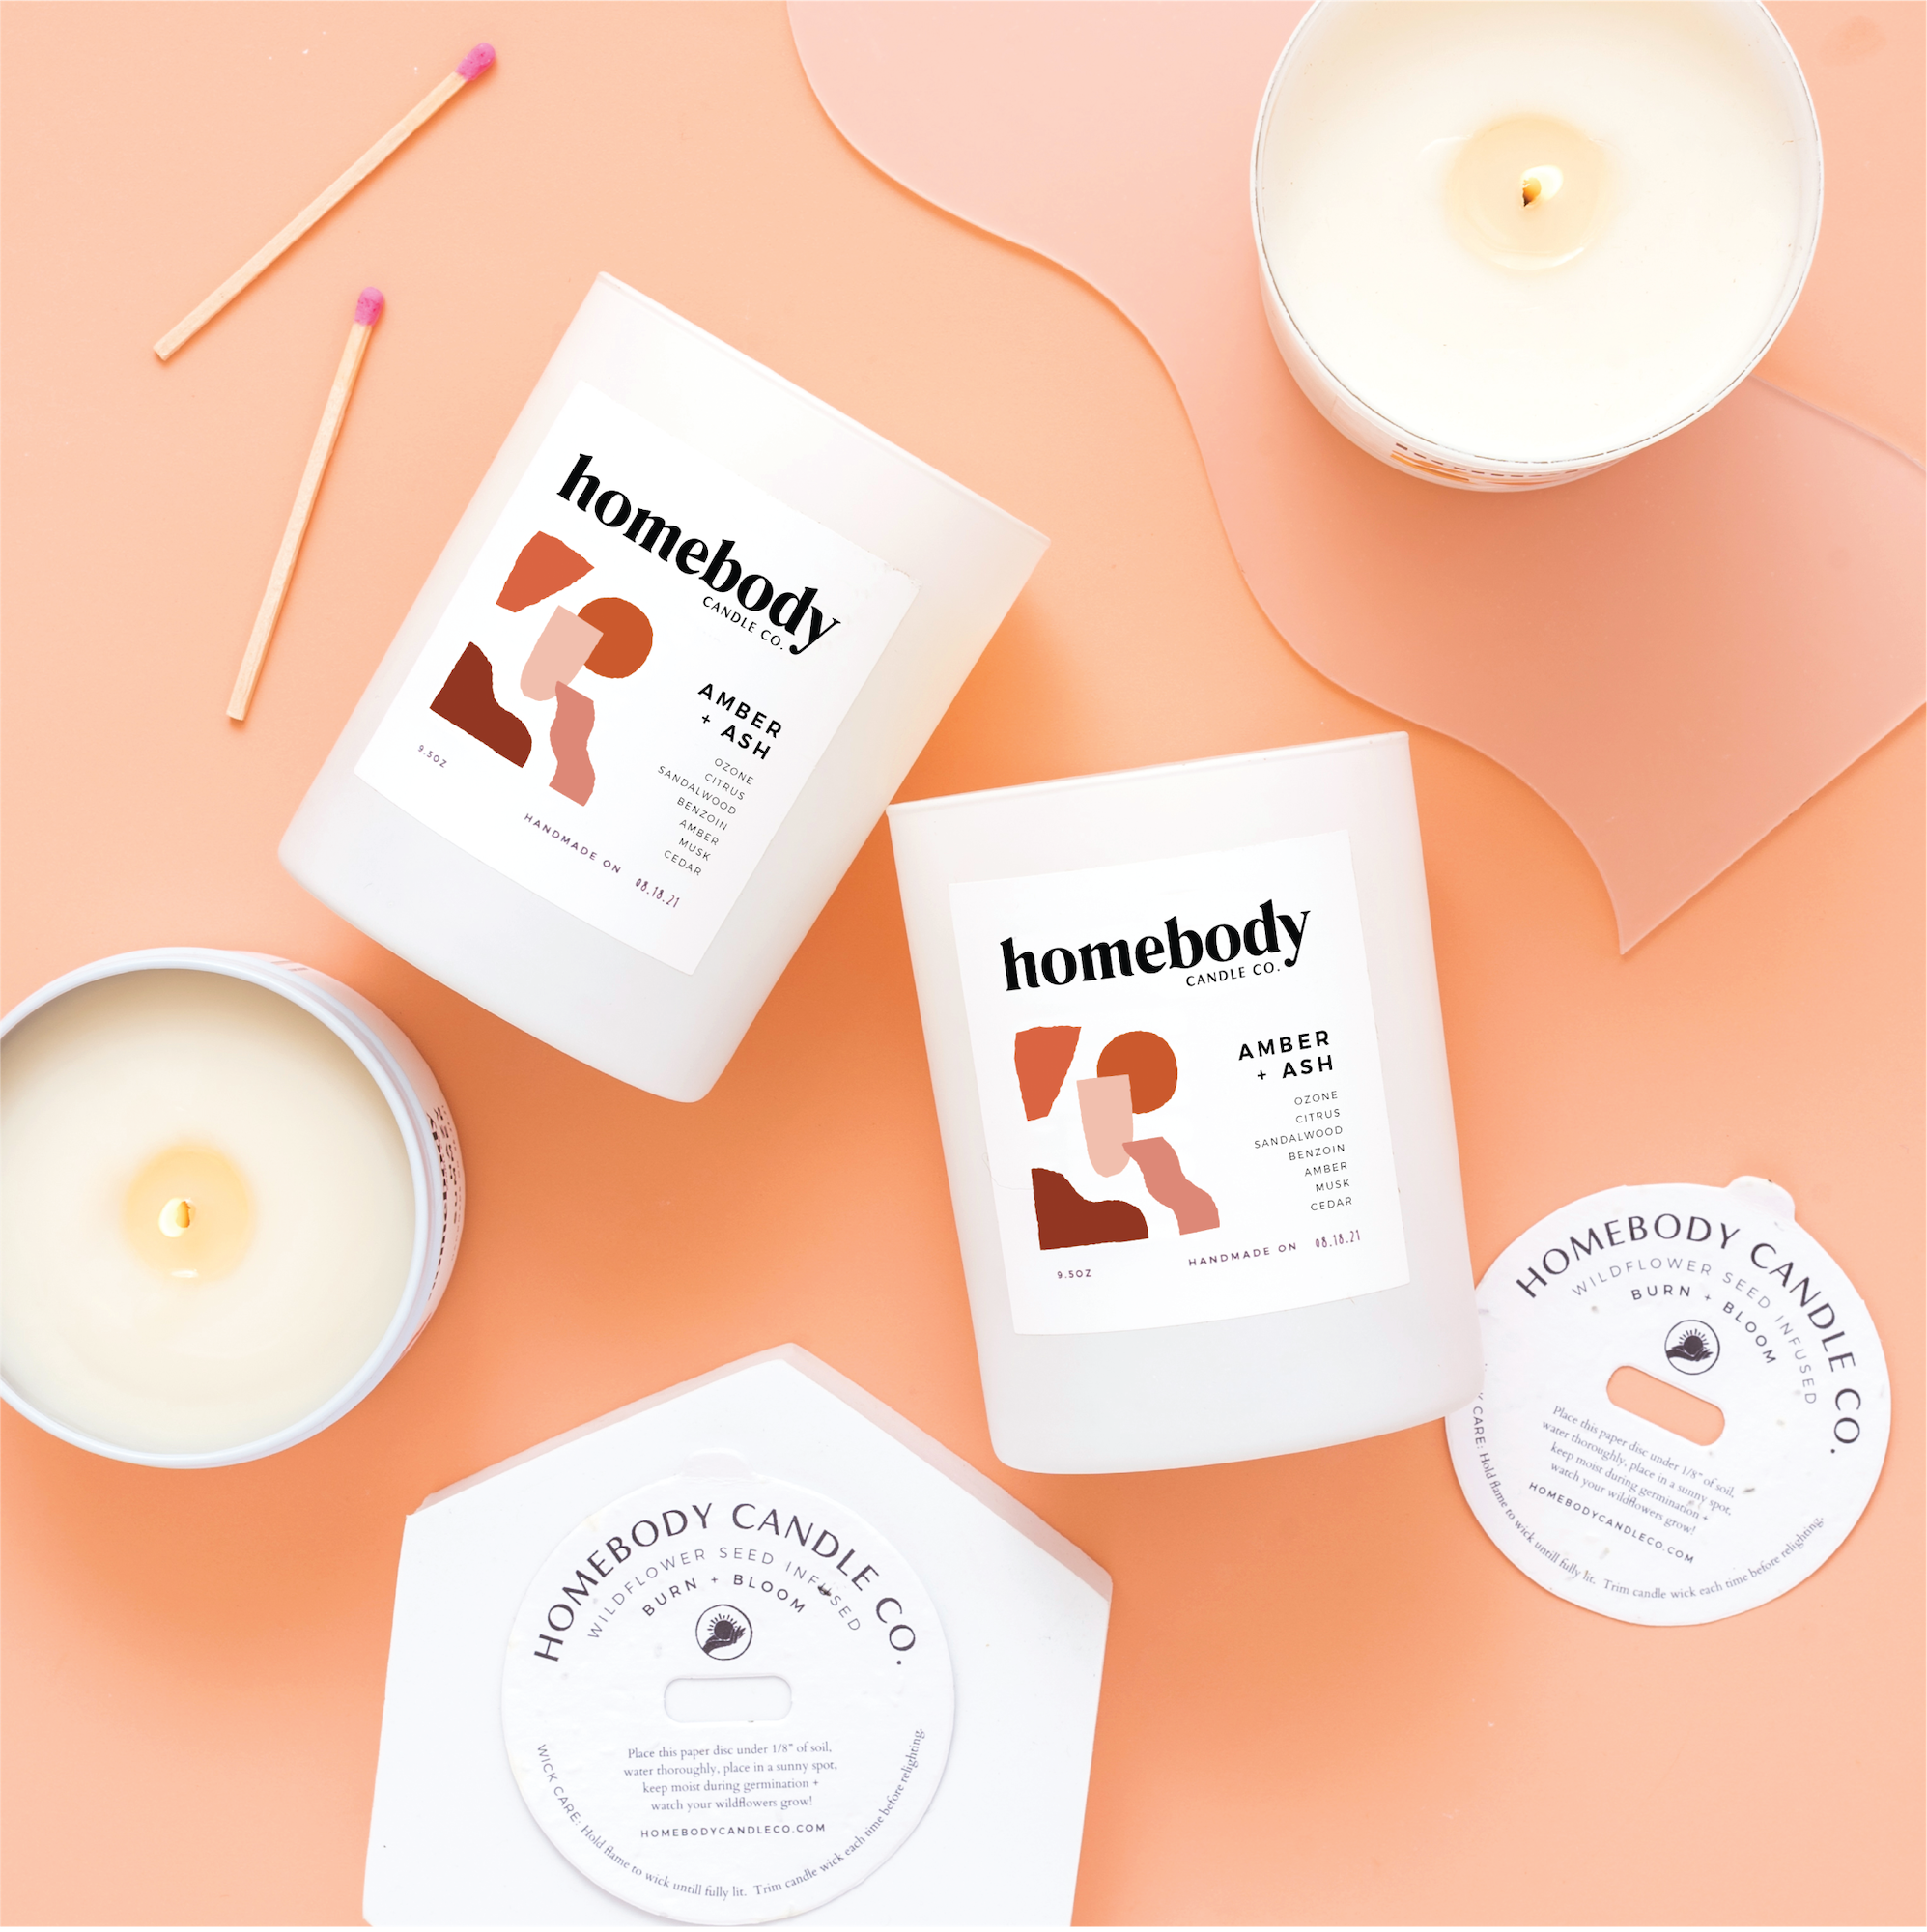 Homebody Candle: Amber + Ash